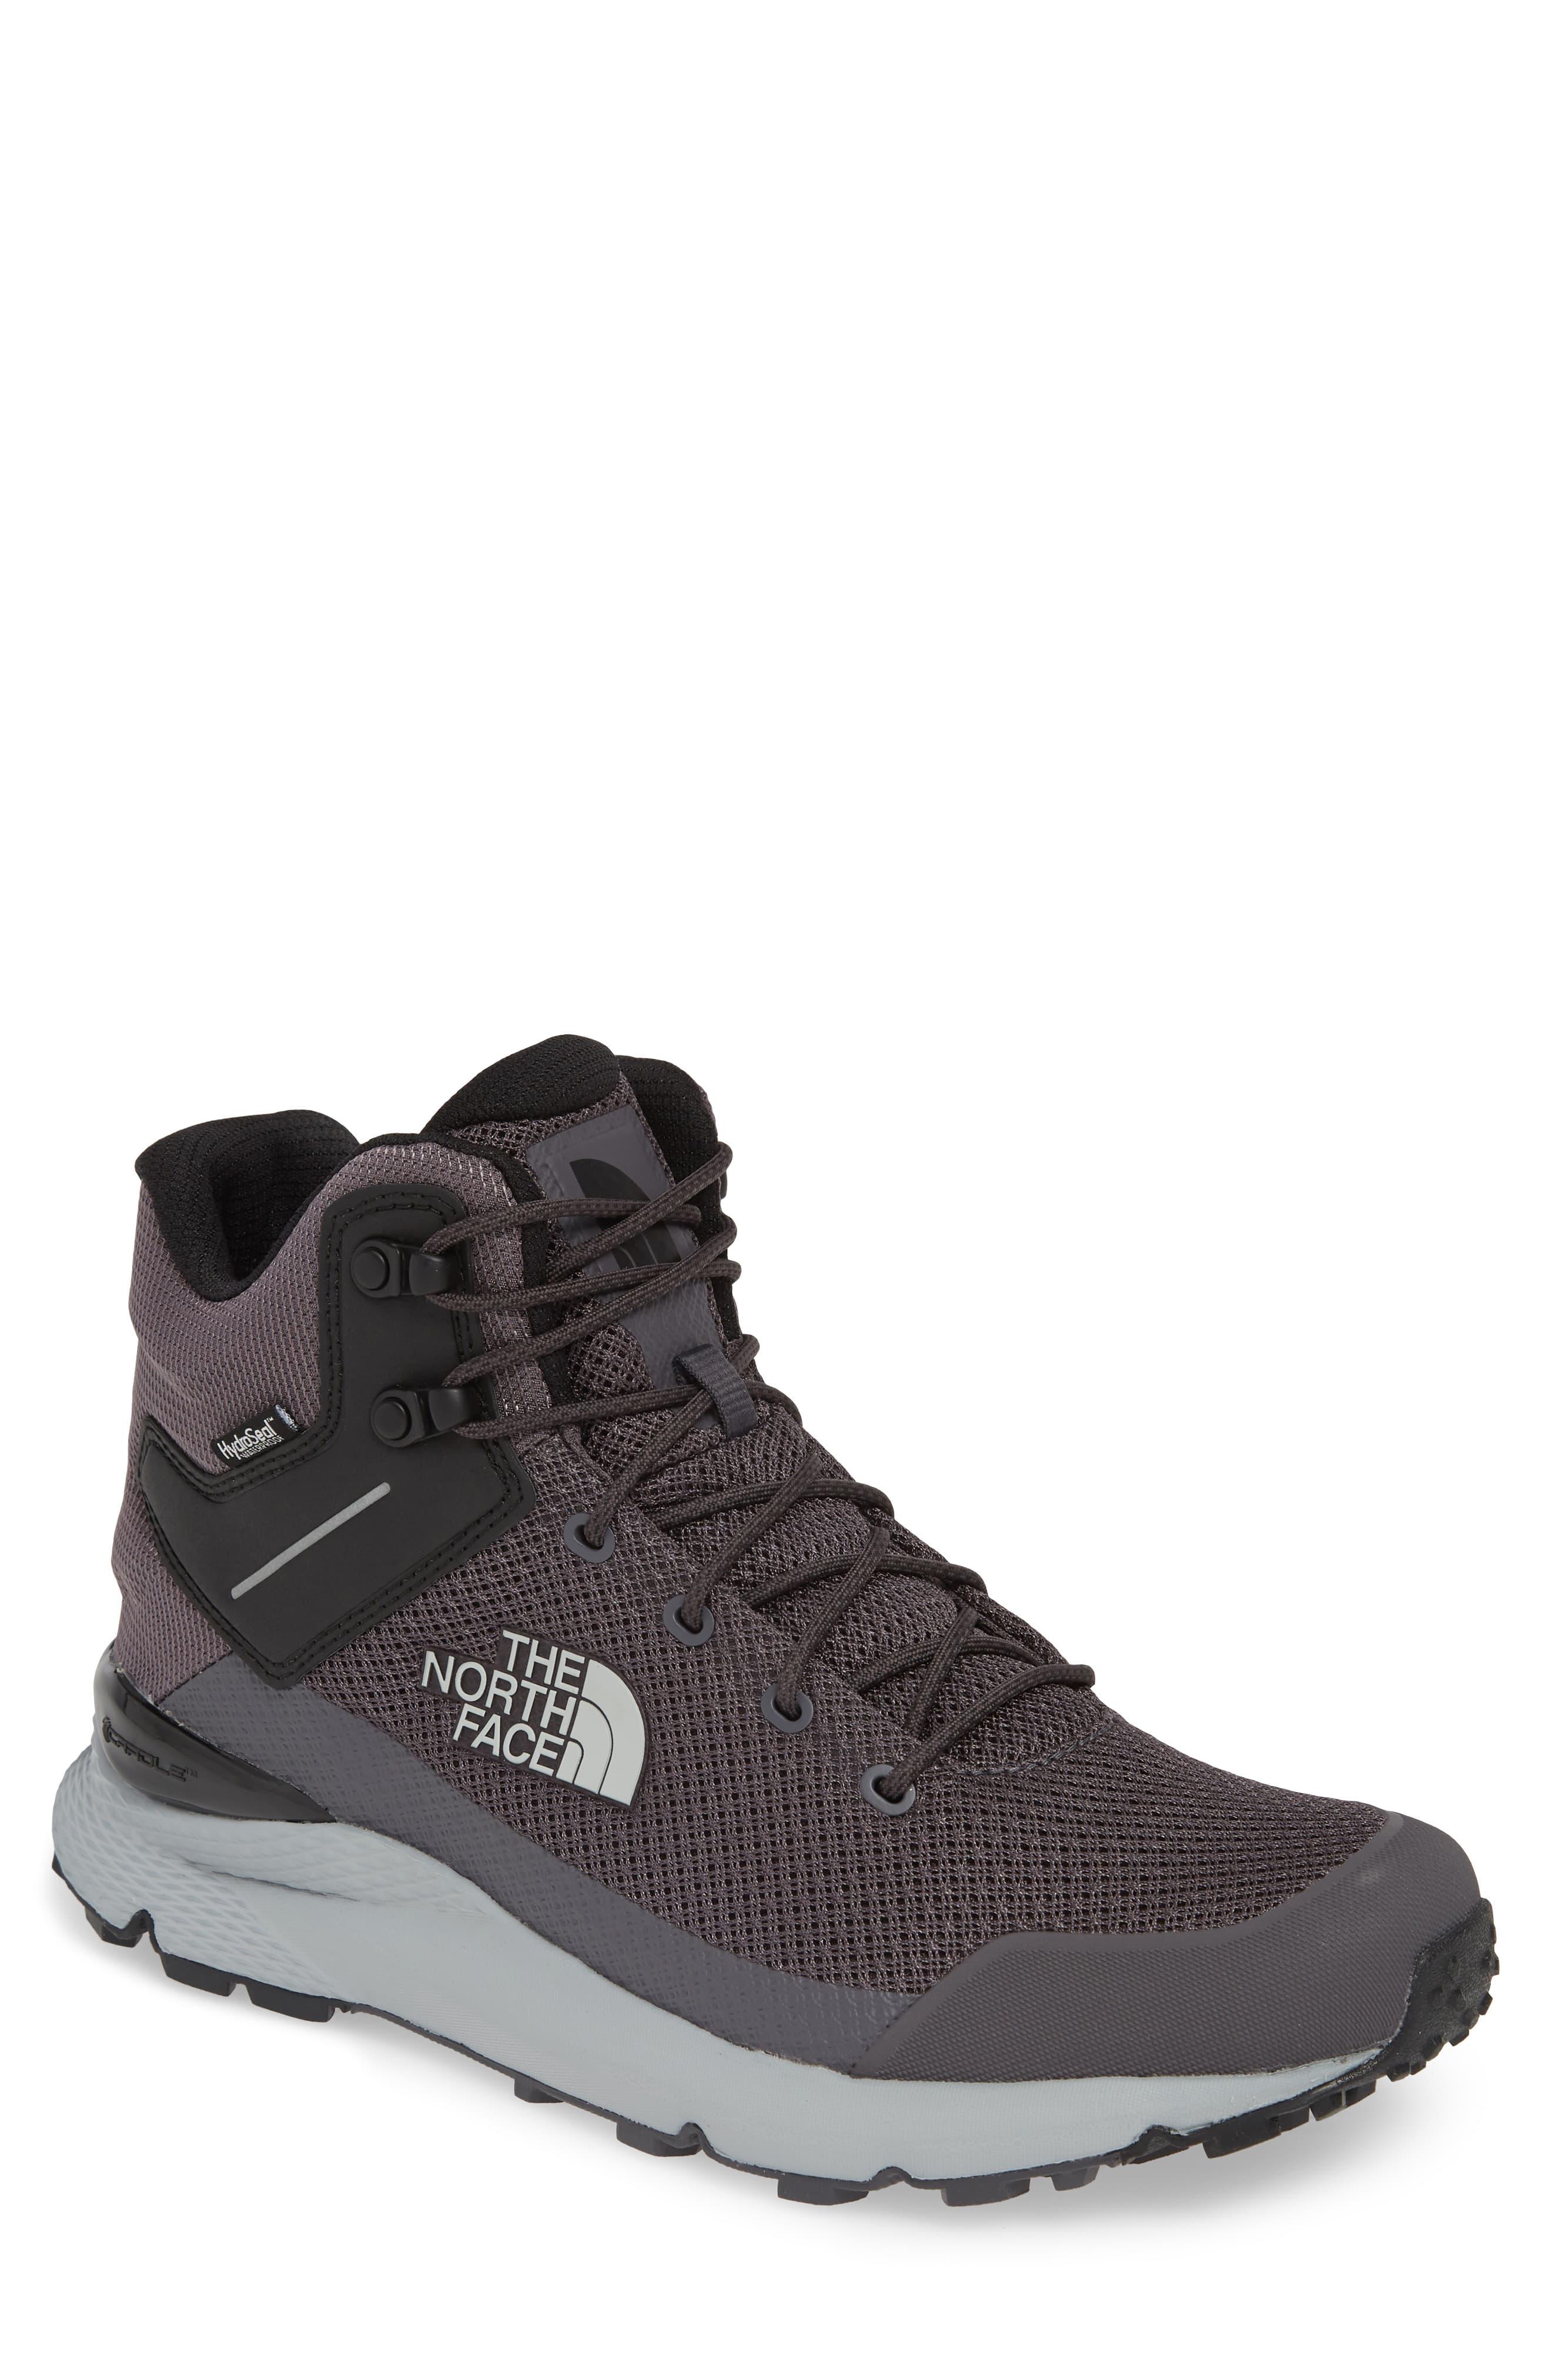 The North Face Val Mid Waterproof Hiking Boot in Black for Men - Lyst